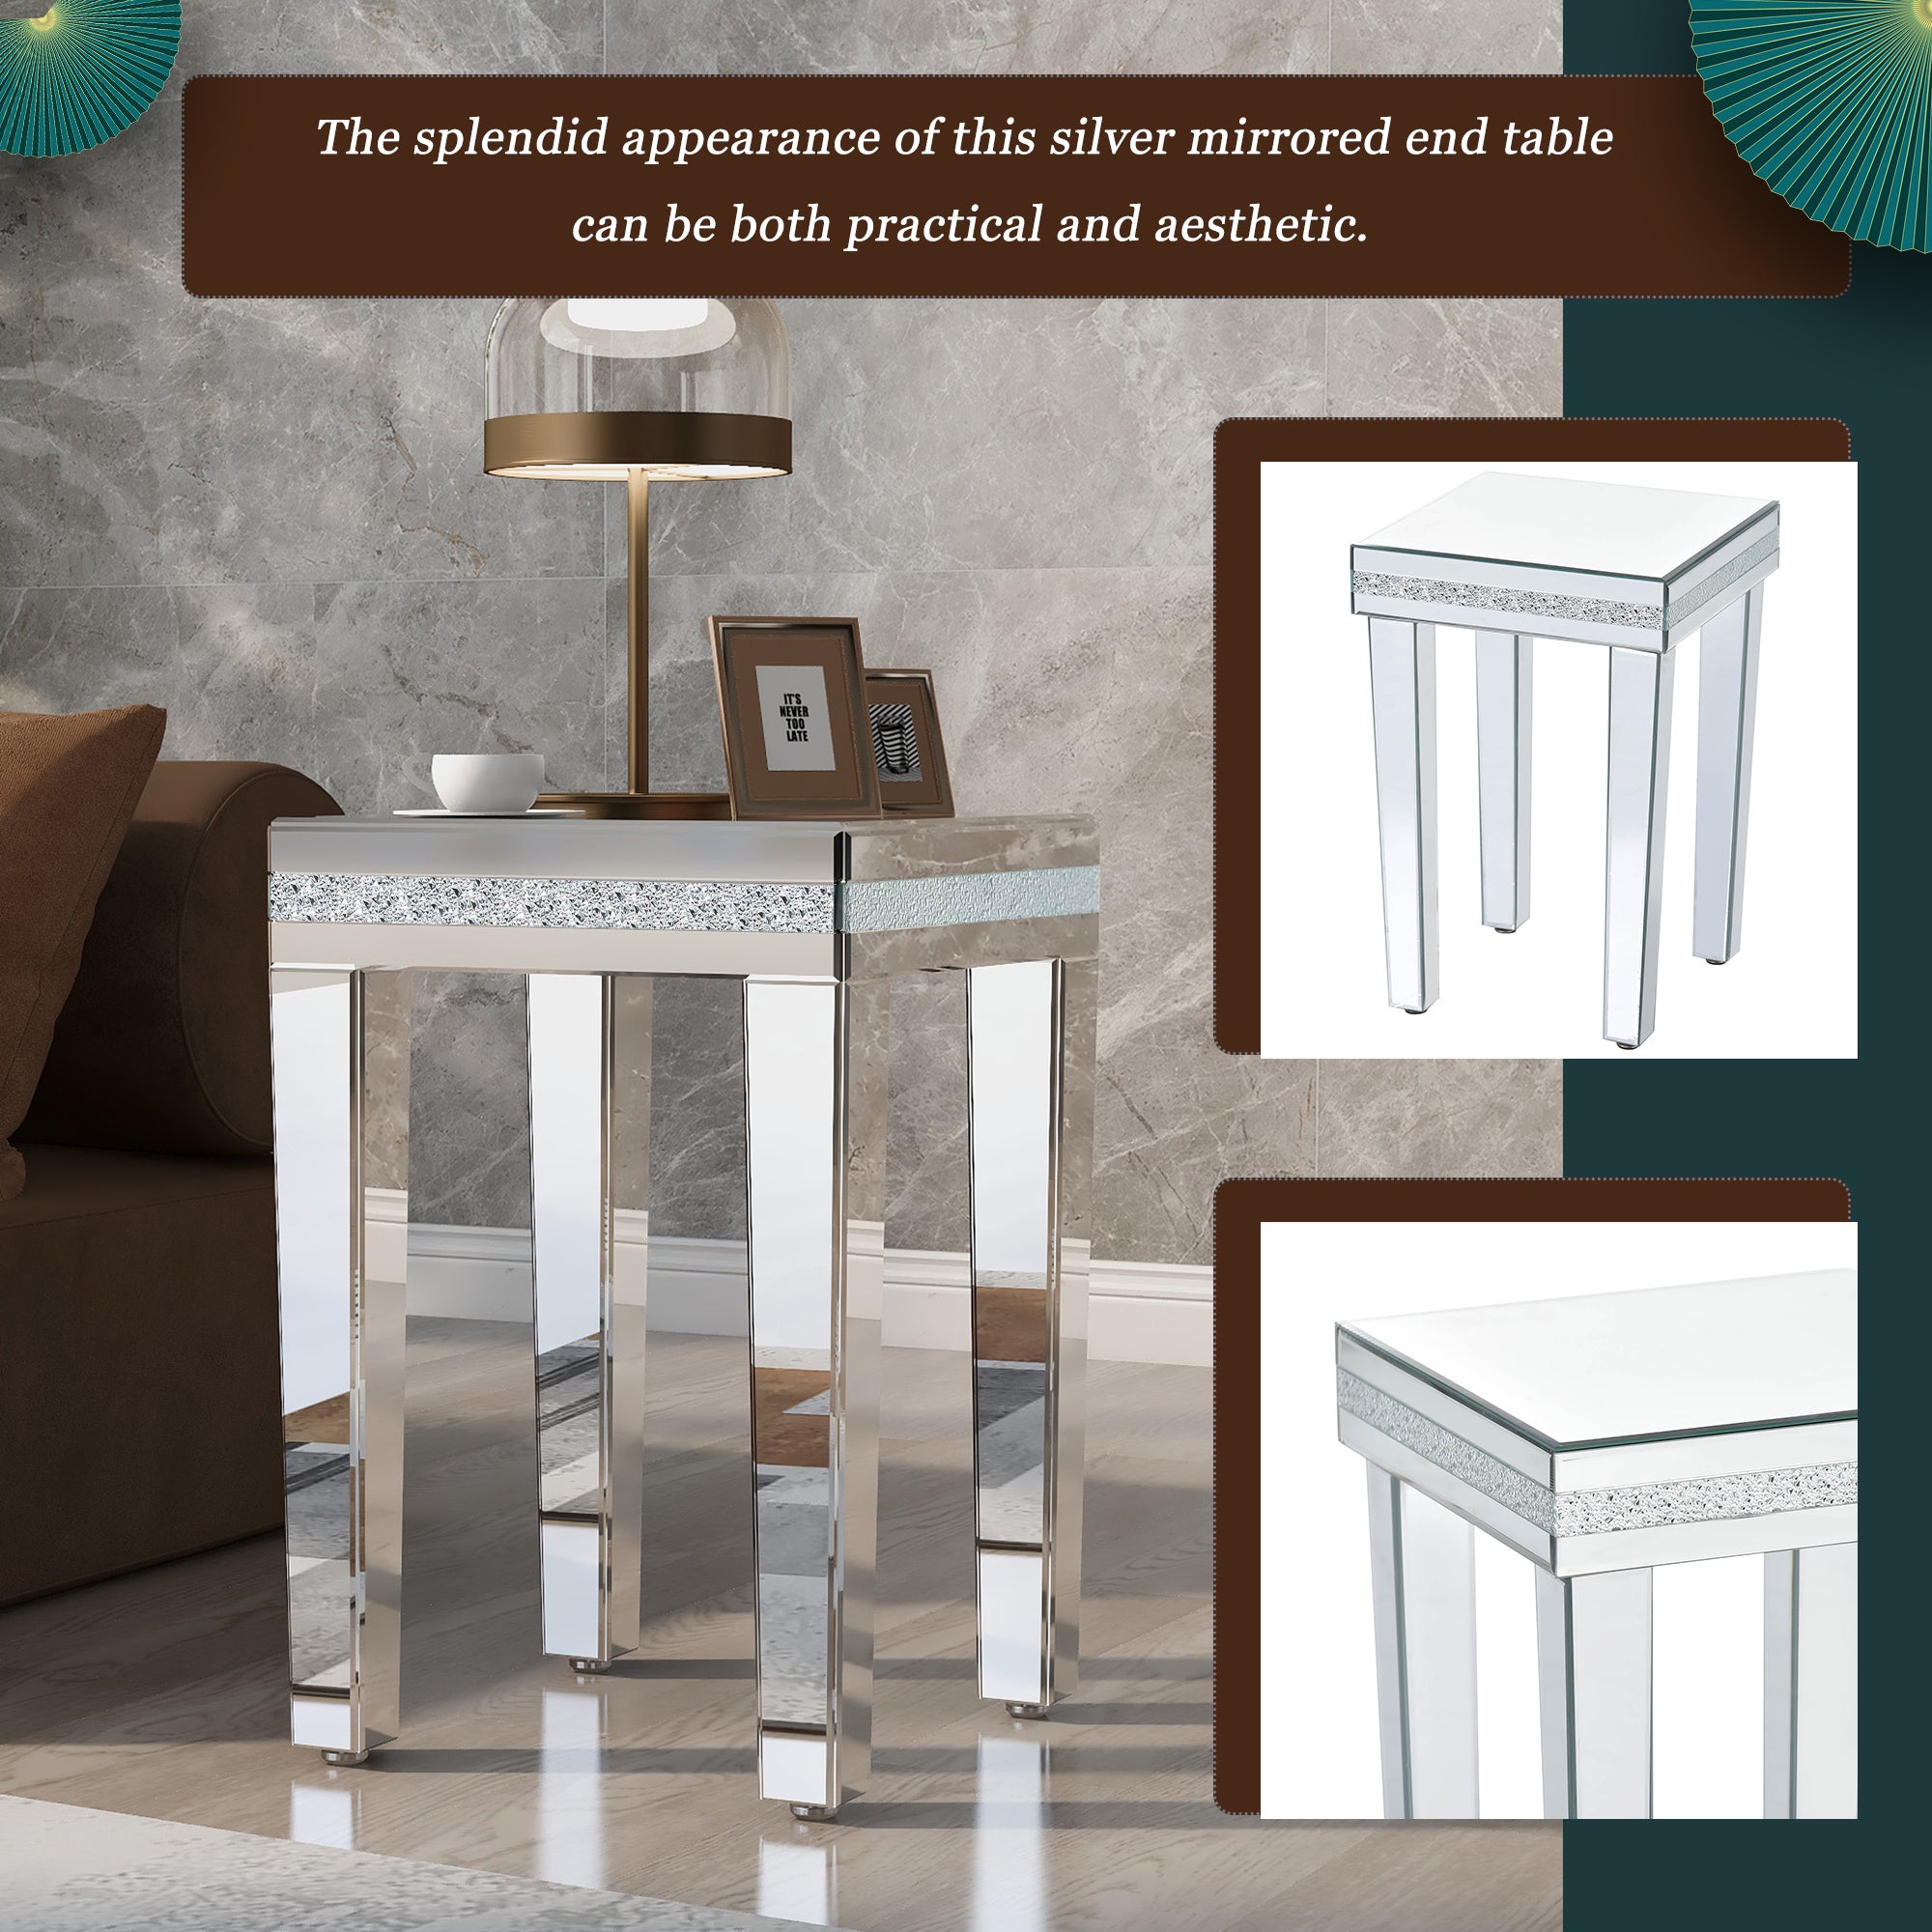 15"x15" Modern Glass Mirrored Side End Table with Crystal Inlay Design